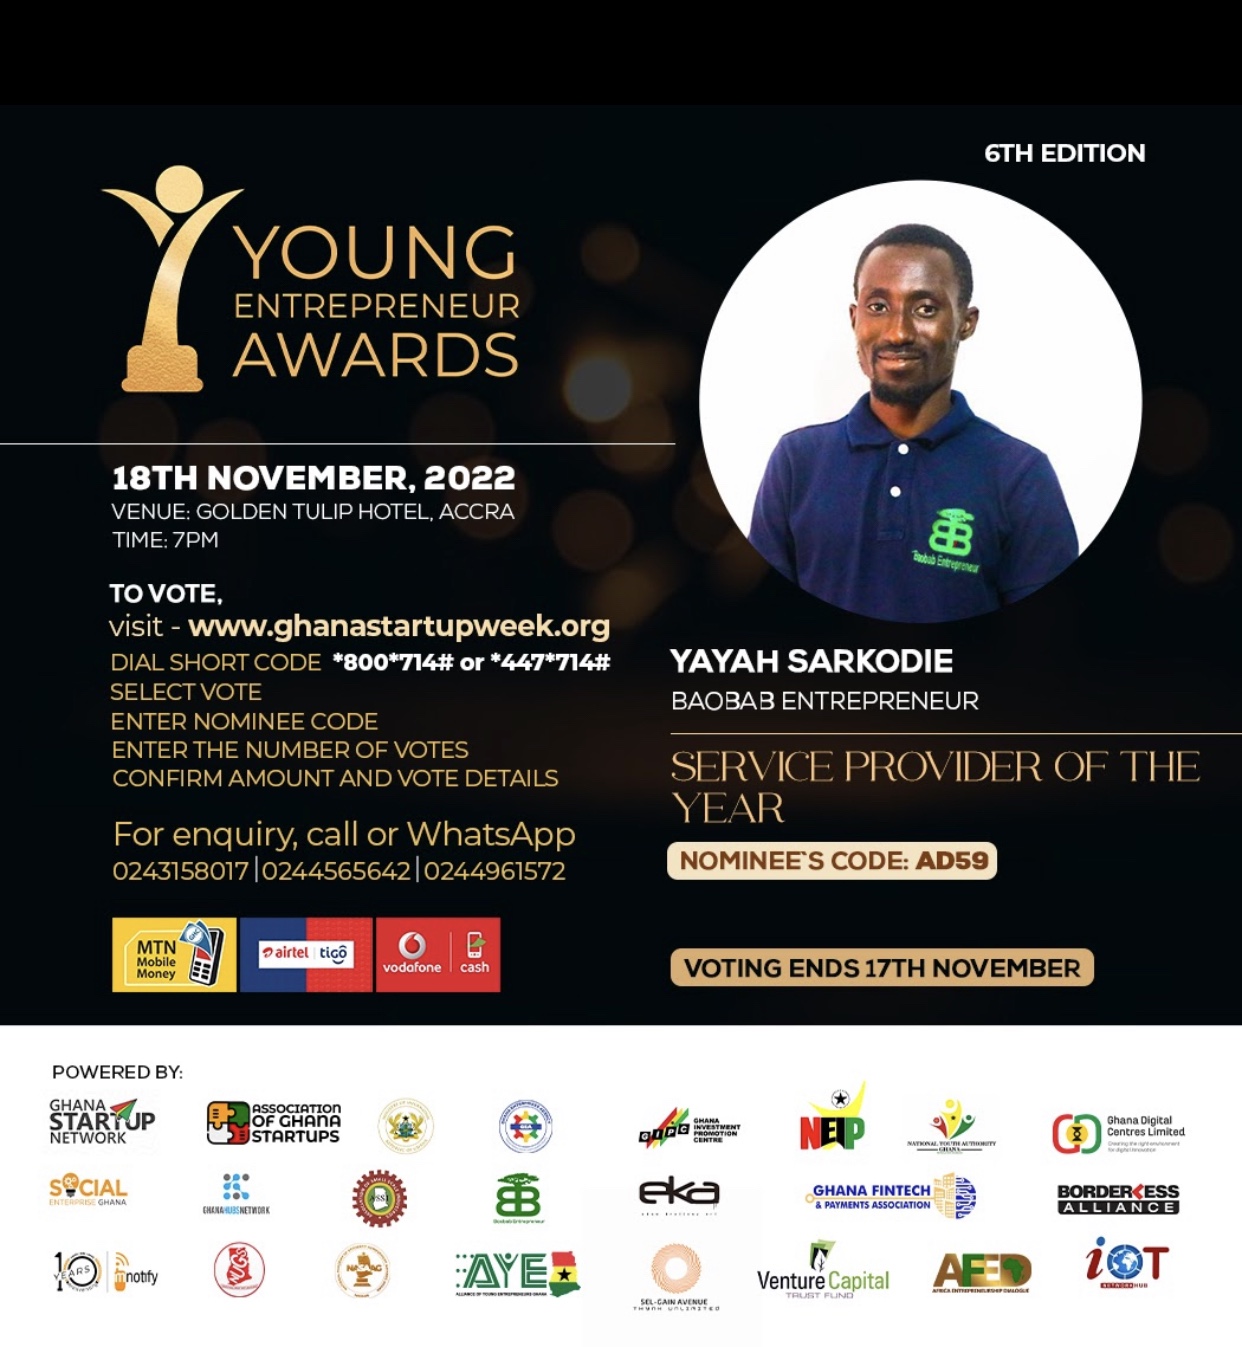 BAOBAB ENTREPRENEUR Chief Executive Officer (CEO) GETS NOMINATION FOR  Service Provider of the Year.